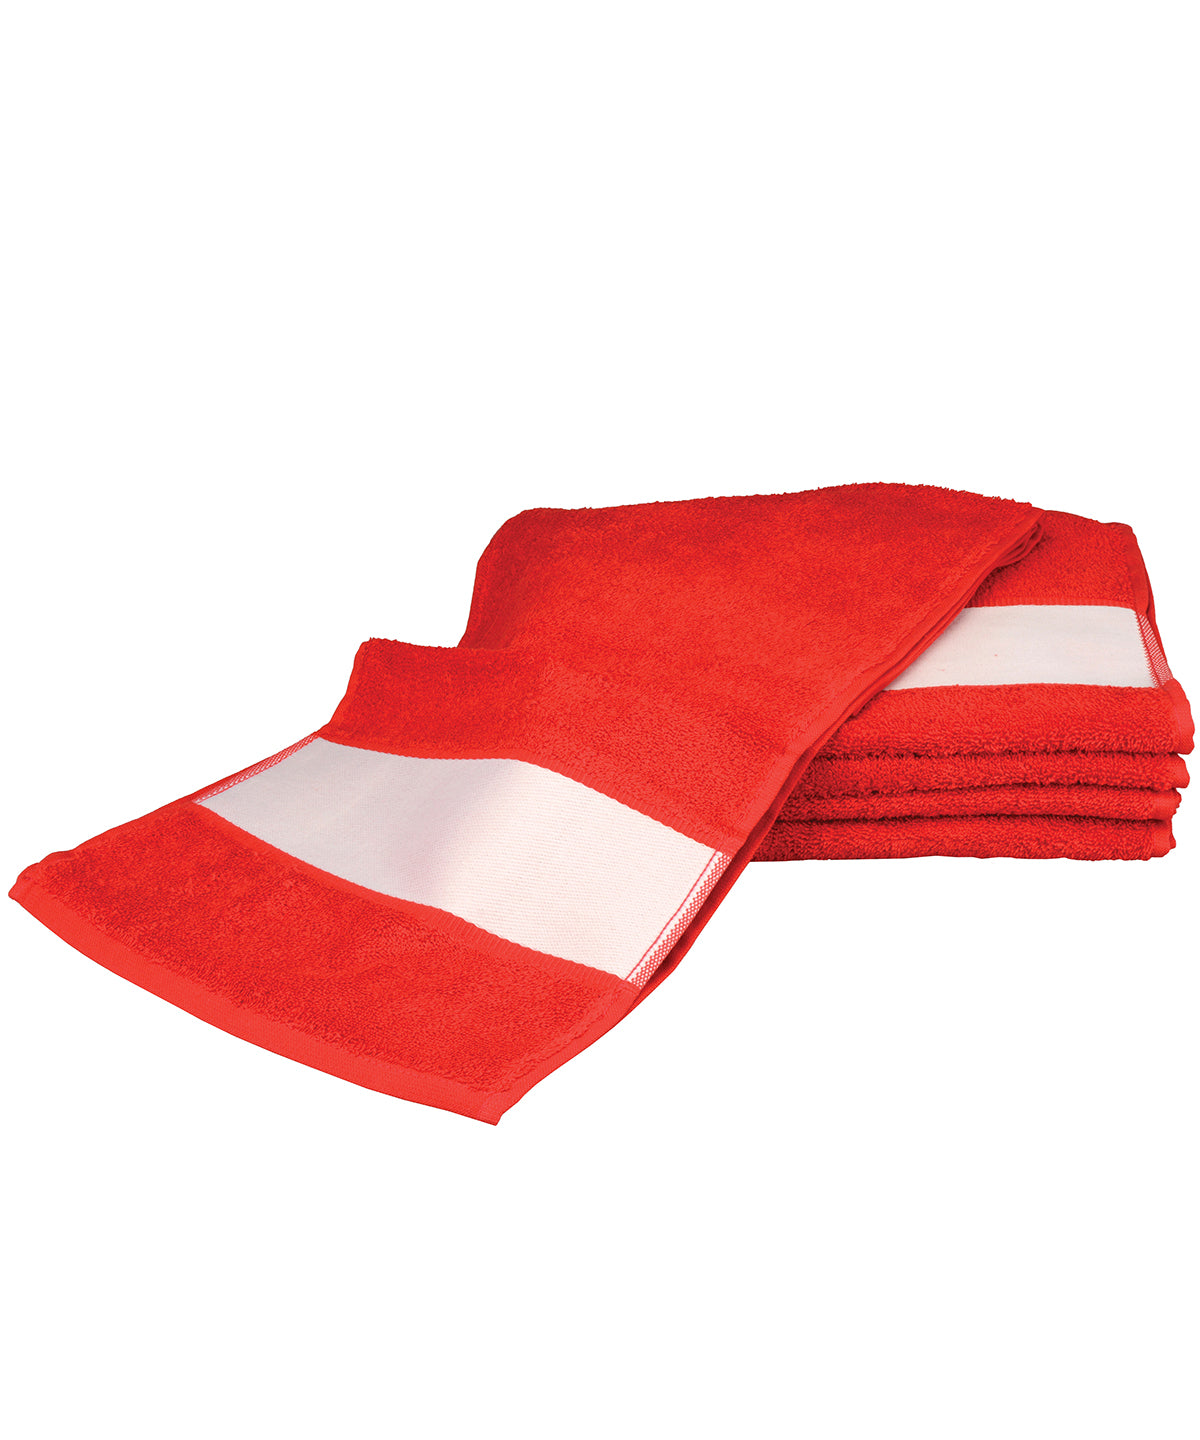 Personalised Towels - Mid Red A&R Towels ARTG® SUBLI-Me® sport towel